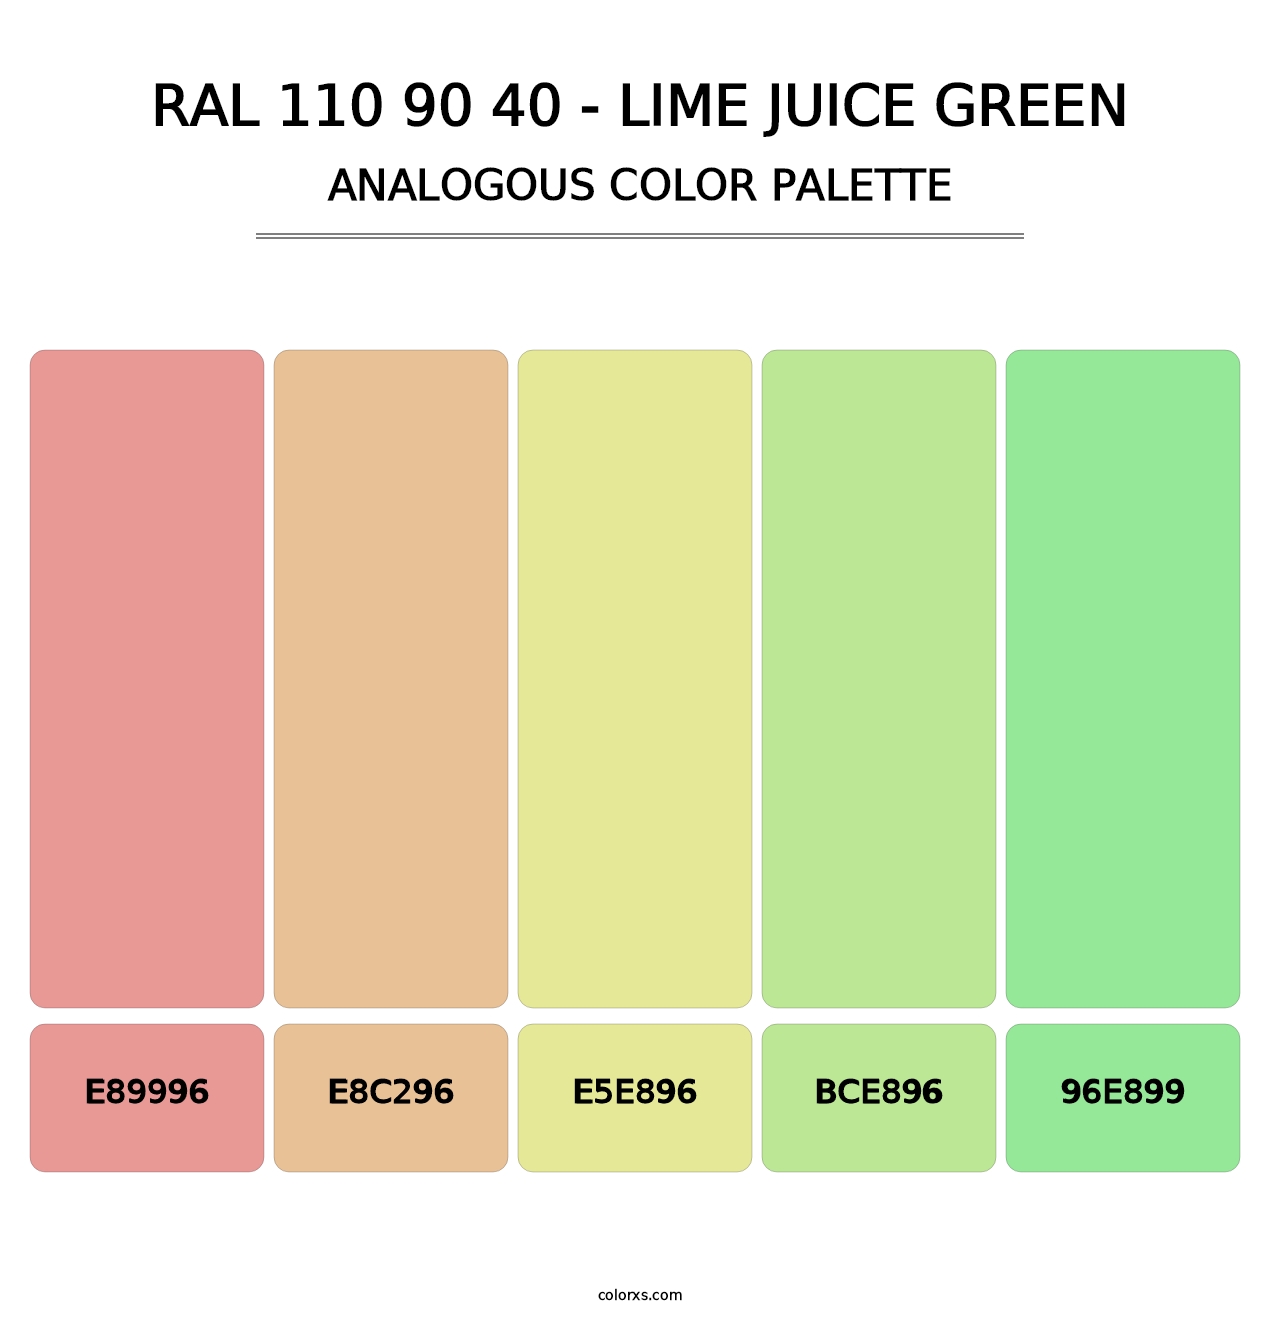 RAL 110 90 40 - Lime Juice Green - Analogous Color Palette